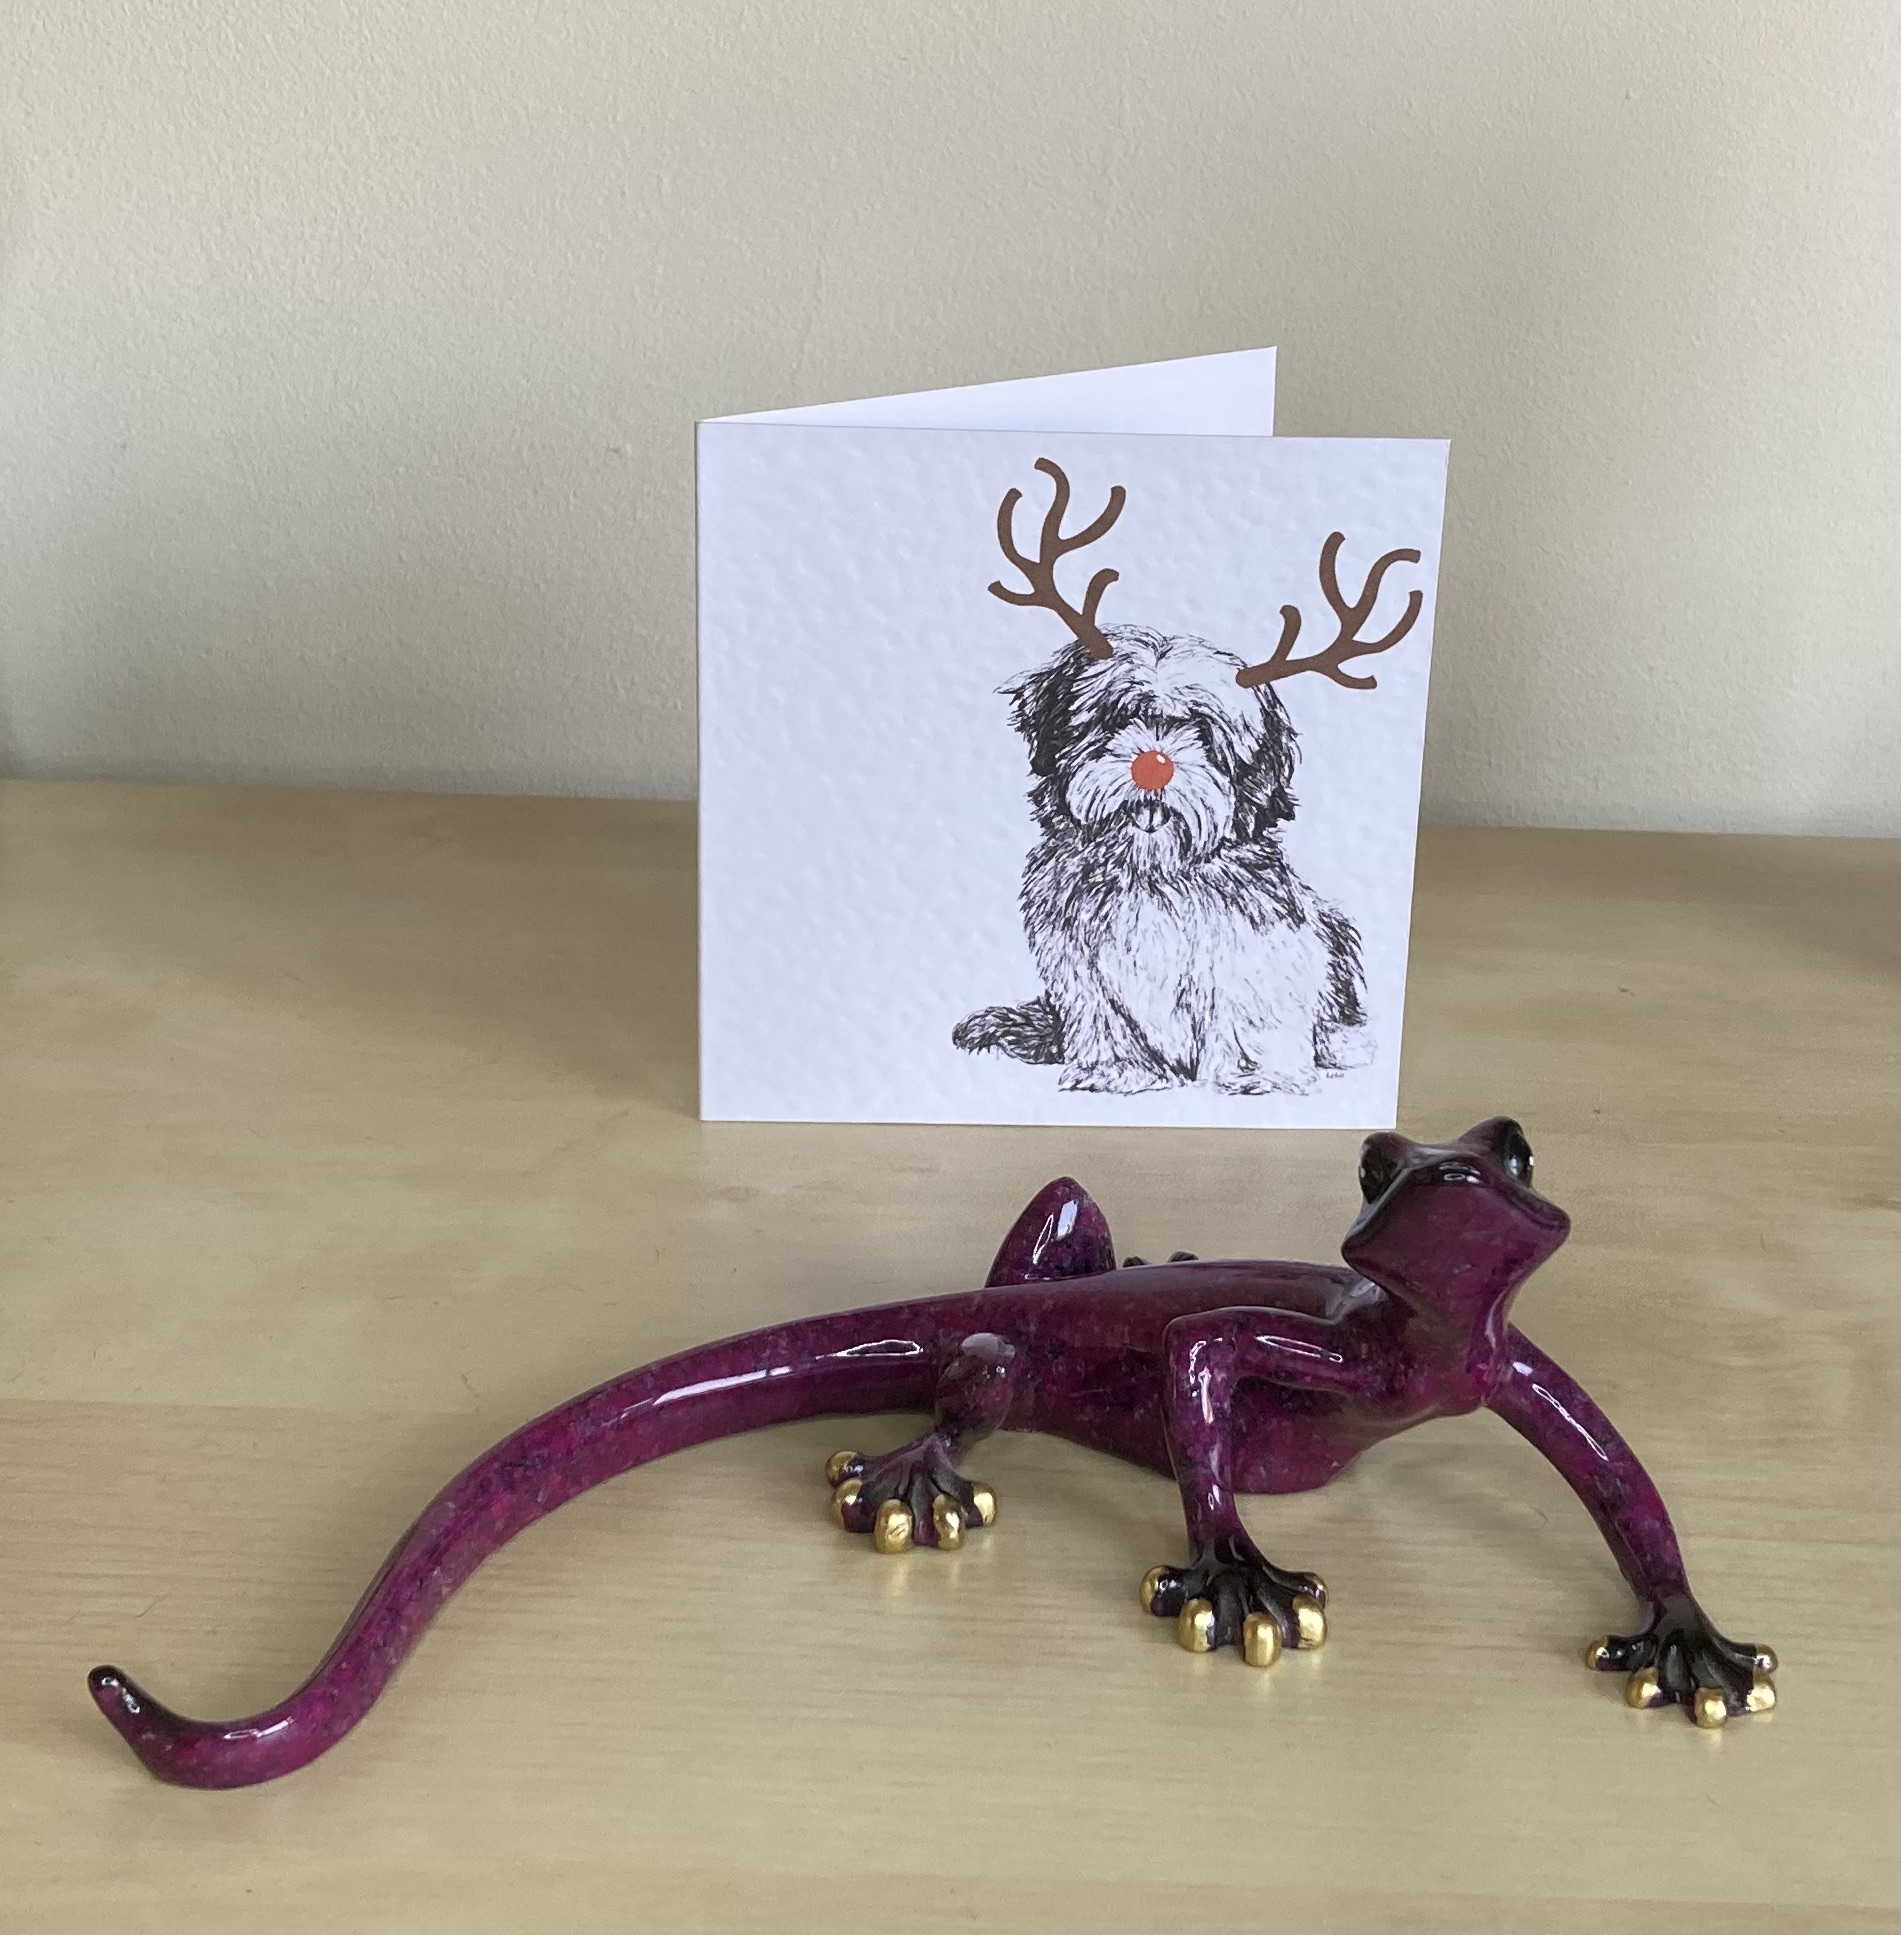 Lhasa Apso with reindeer antlers and red nose Christmas card by Louisa Hill